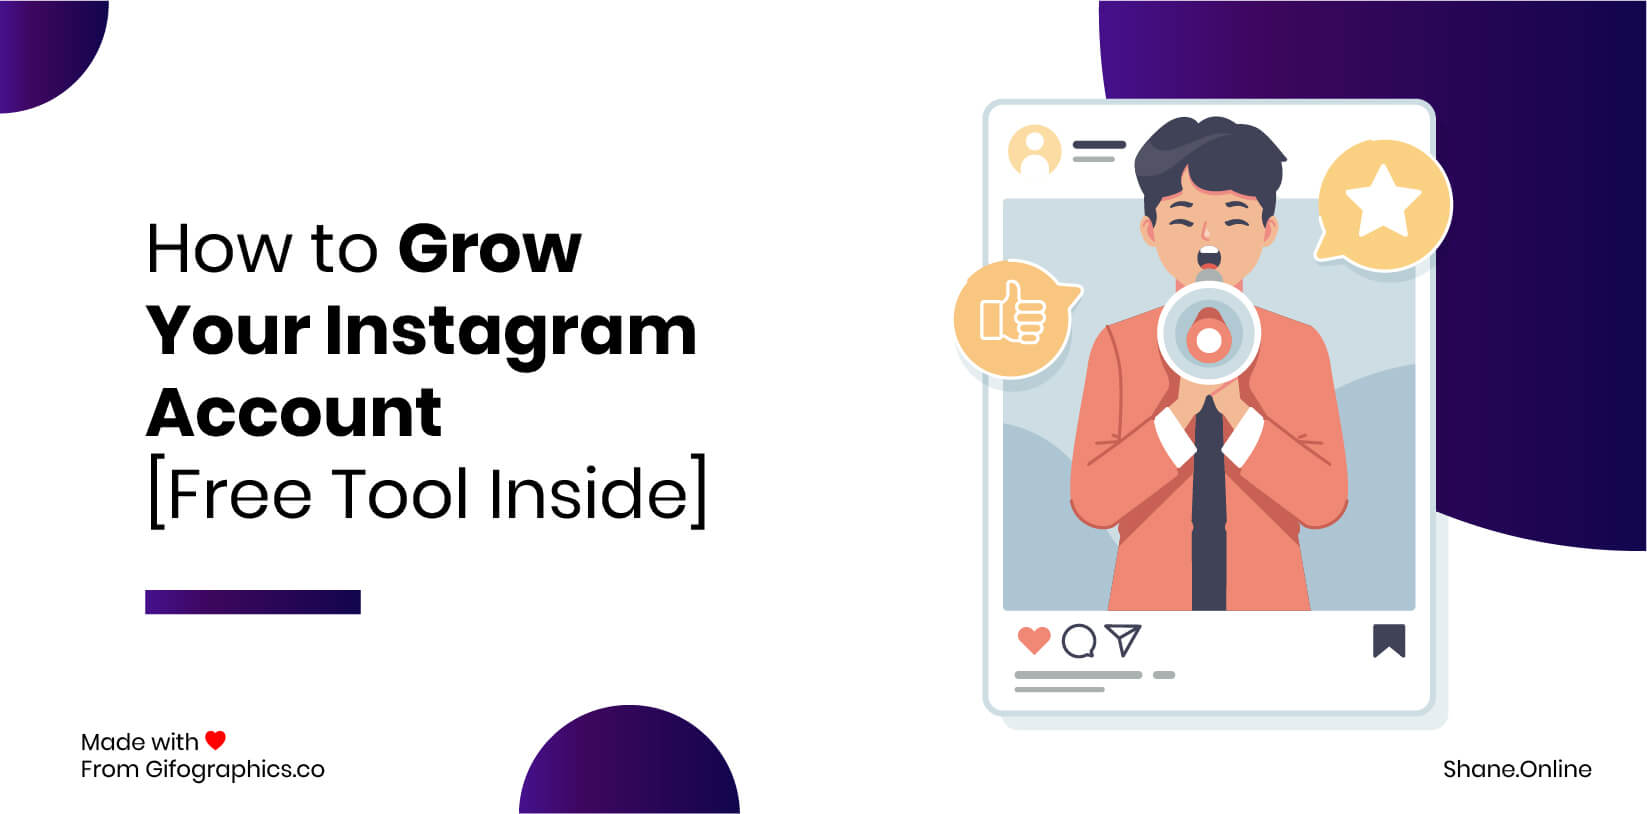 How to Grow Your Instagram Account [Free Tool Inside]“decoding=